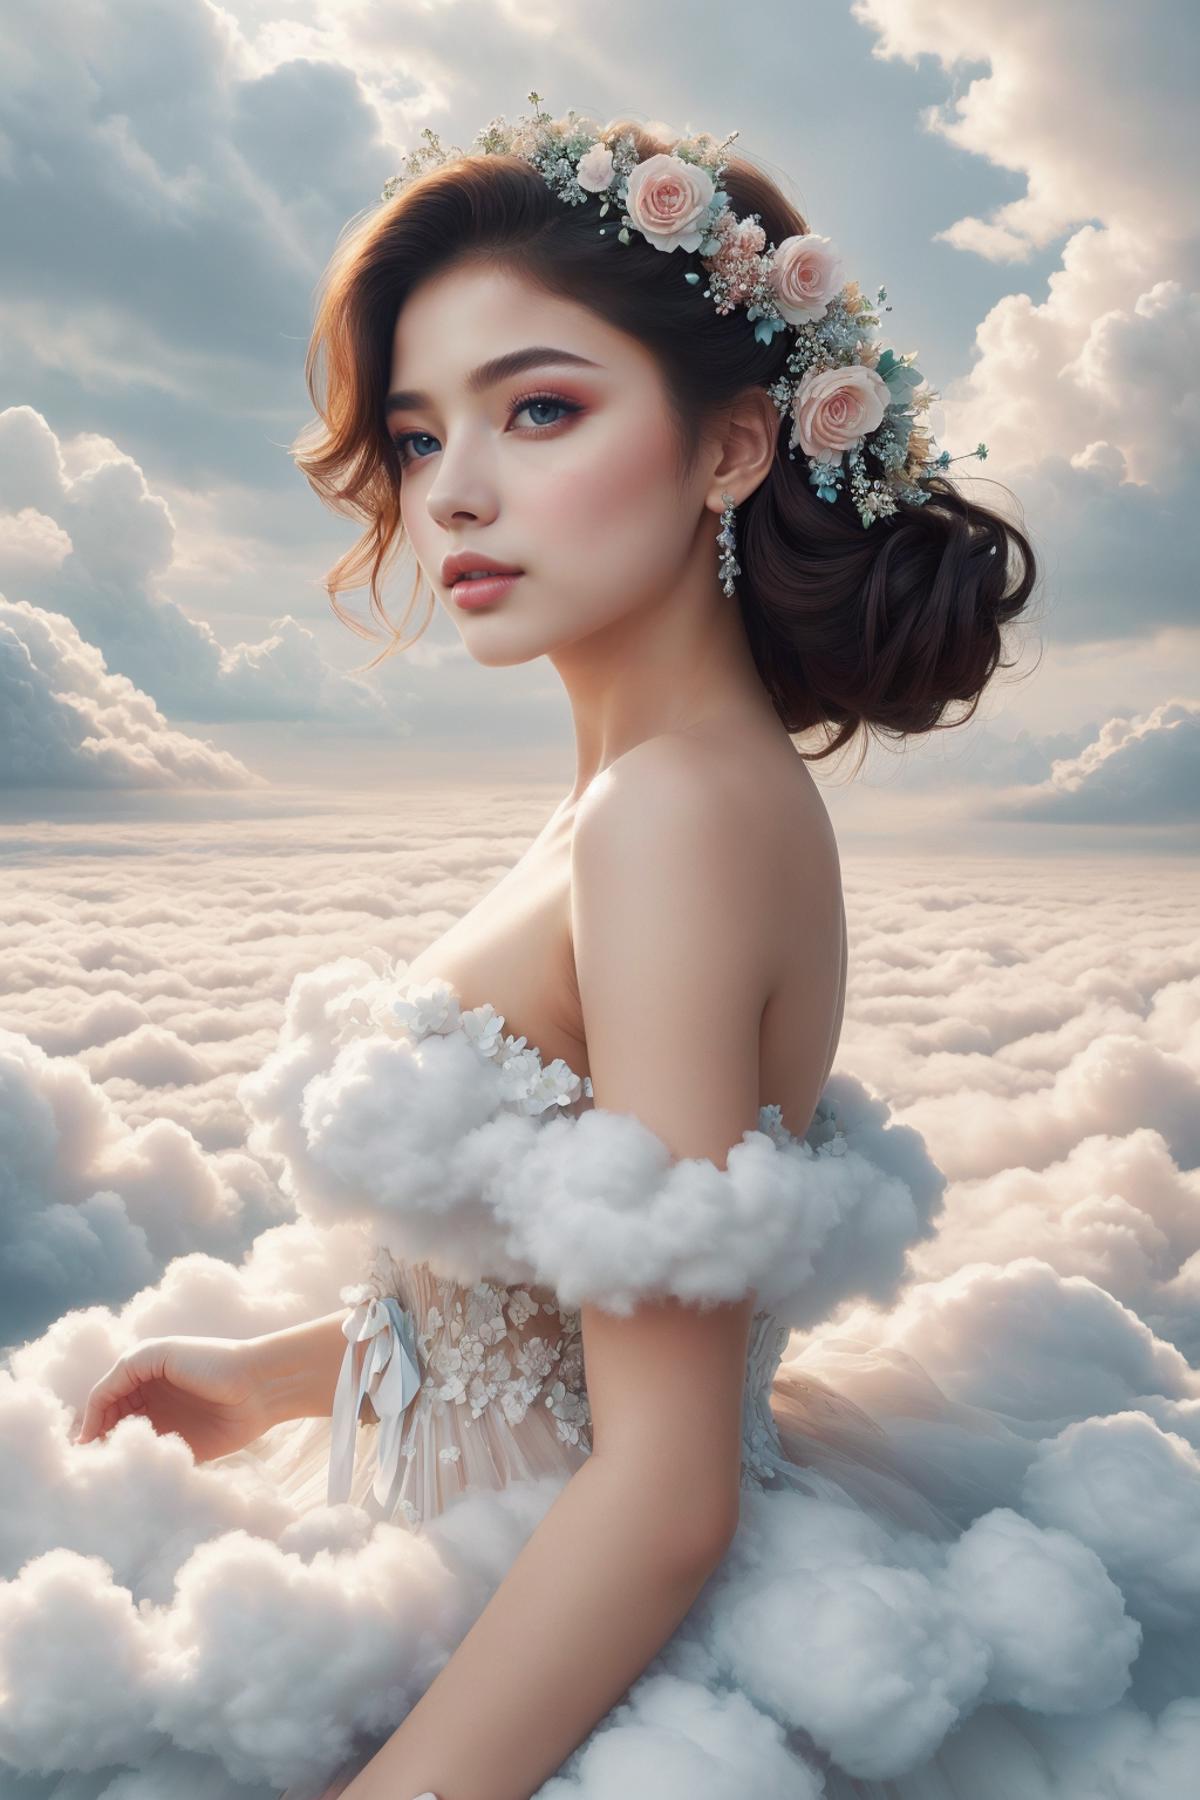 A beautiful girl with a flower in her hair standing in the clouds.